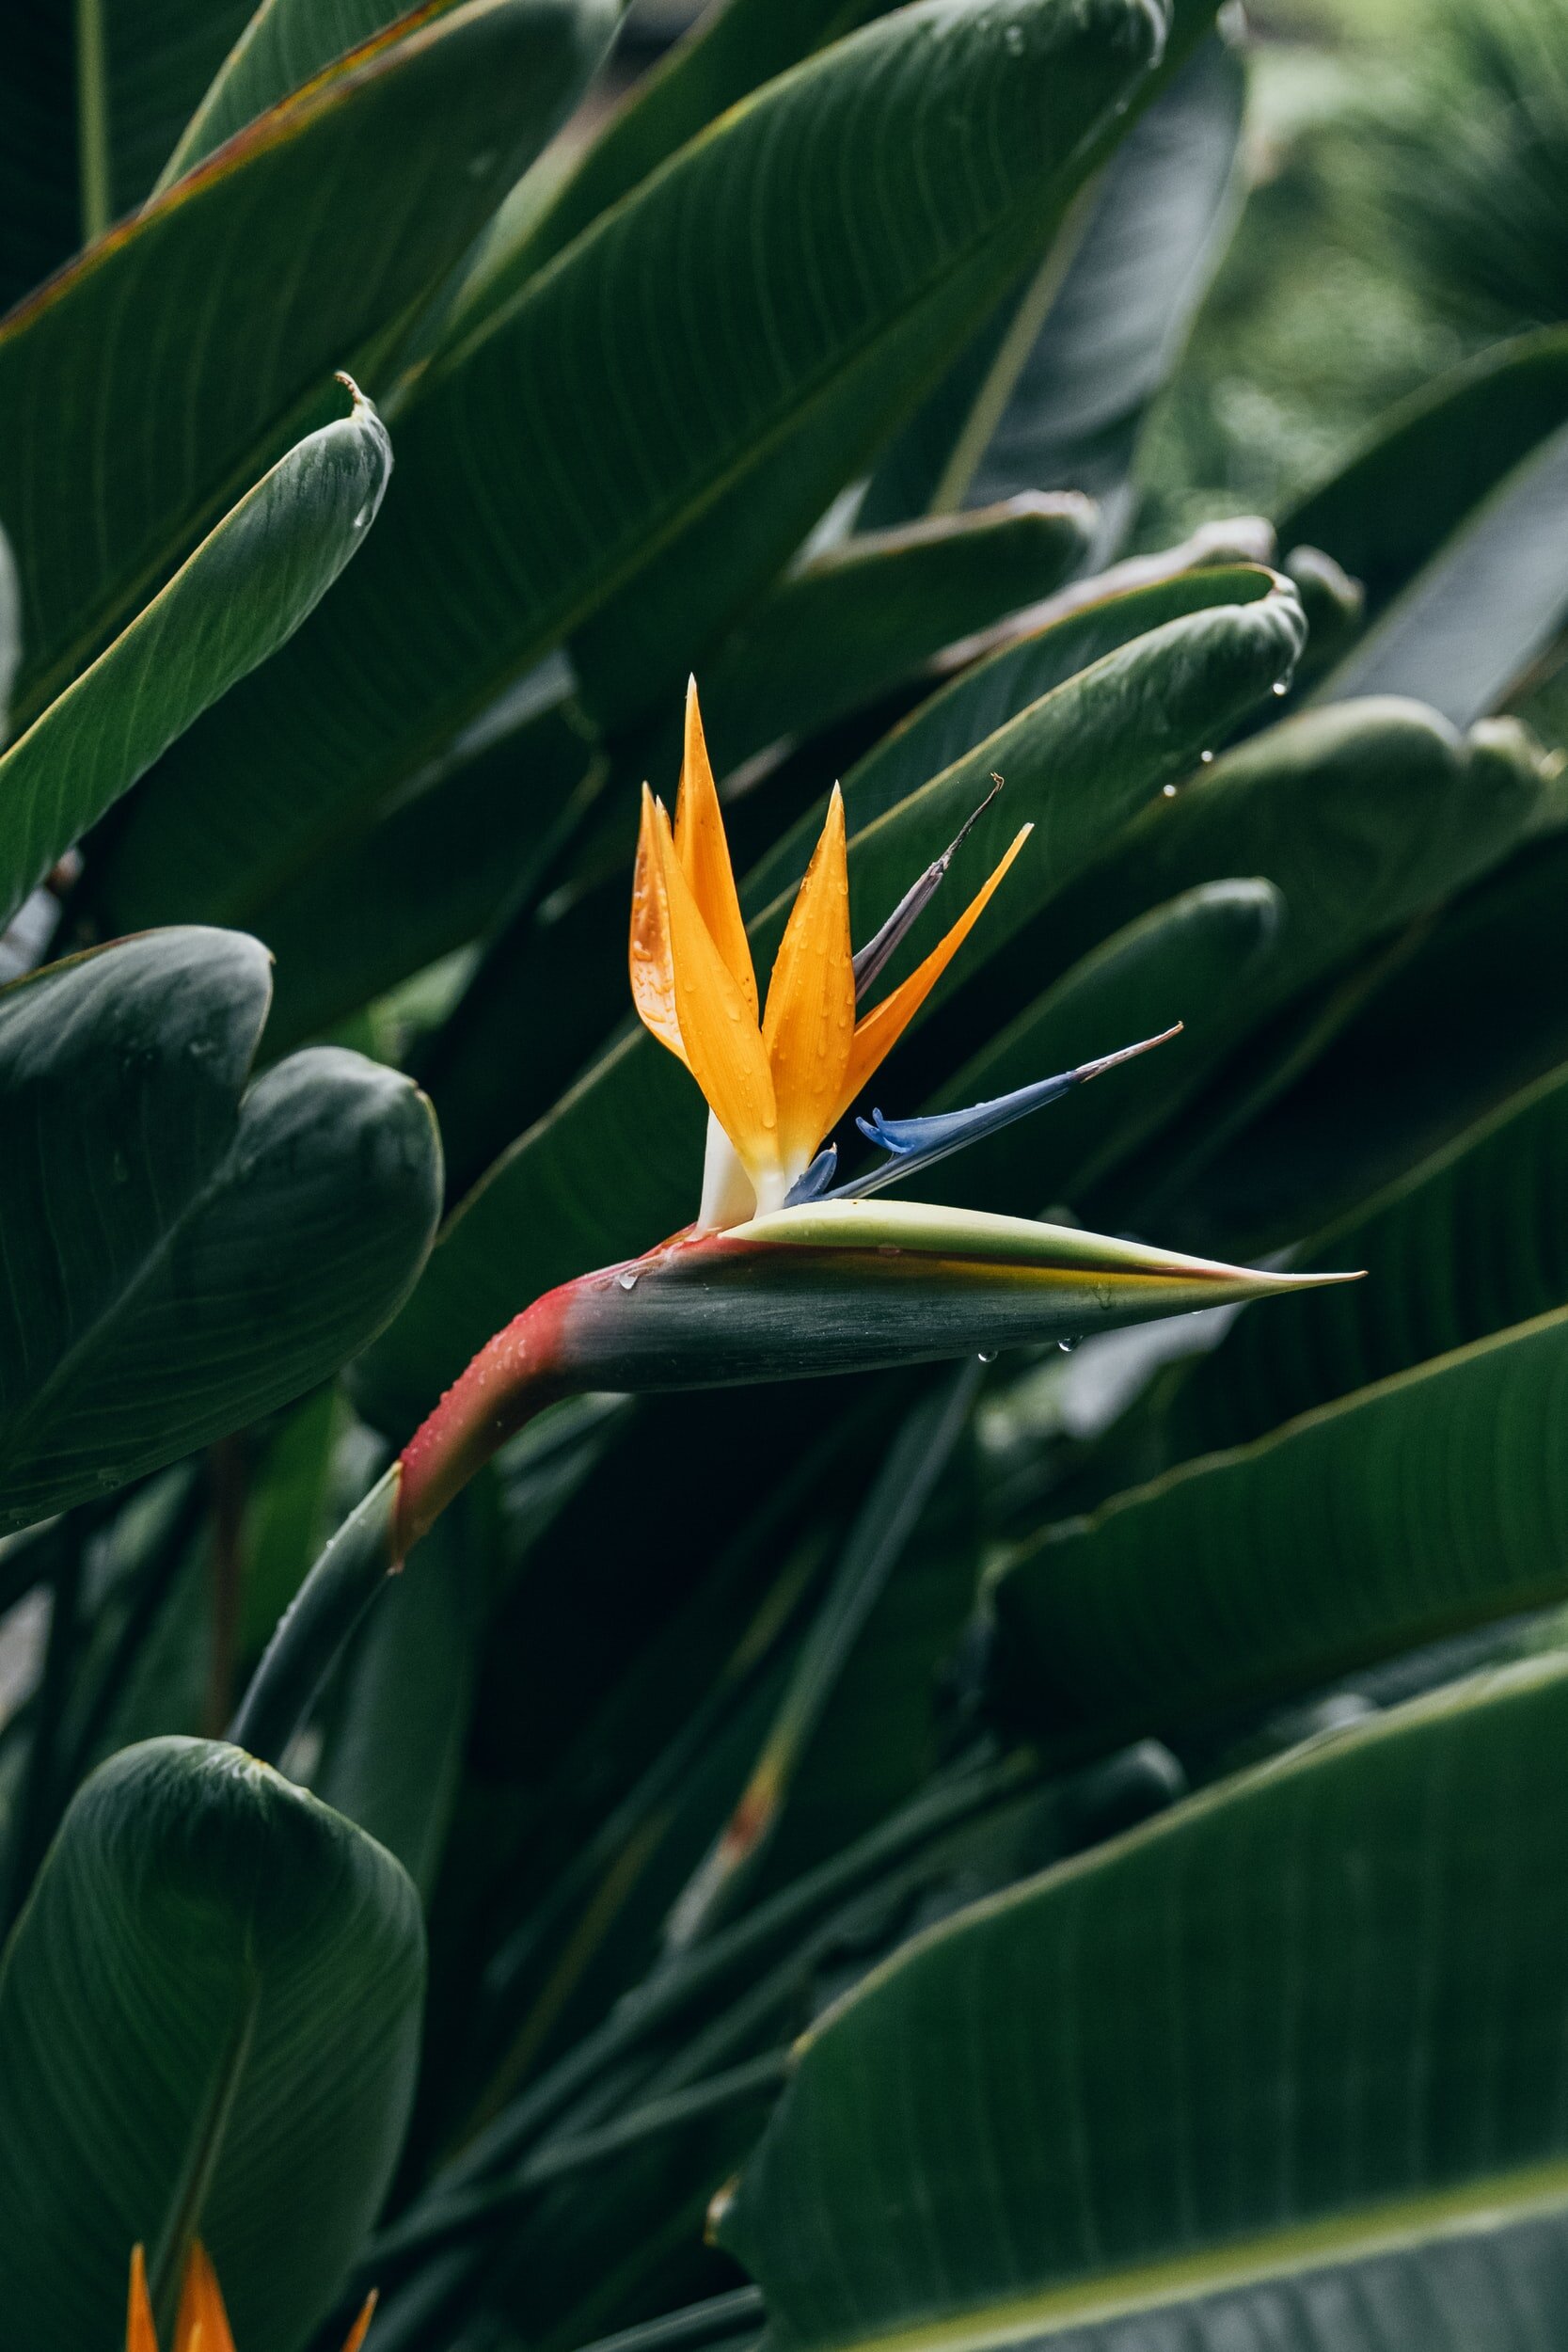 Bird of Paradise: How to Care for Bird of Paradise Plants